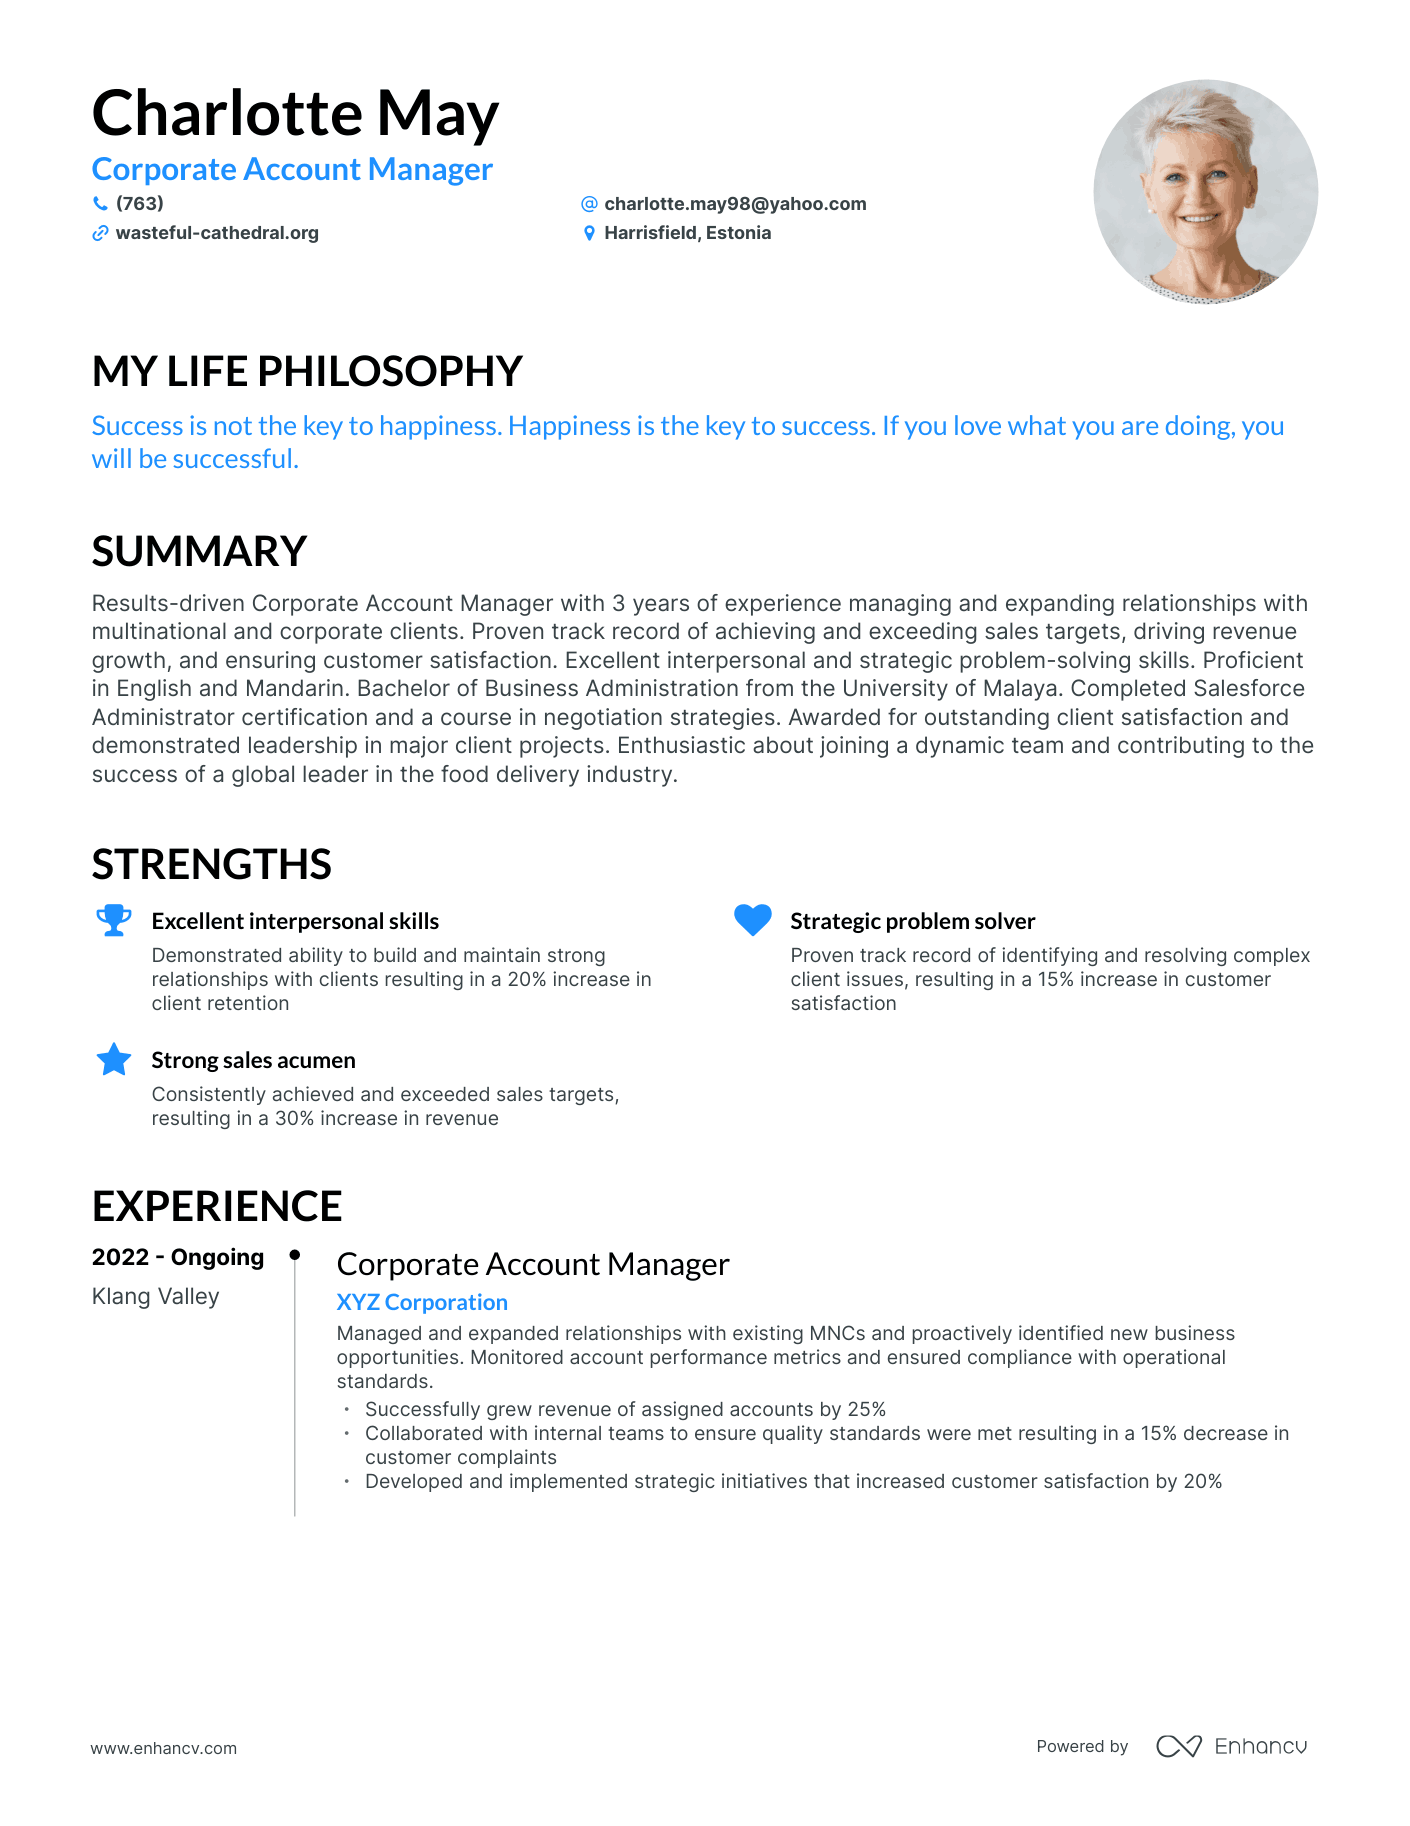 Creative Corporate Account Manager Resume Example